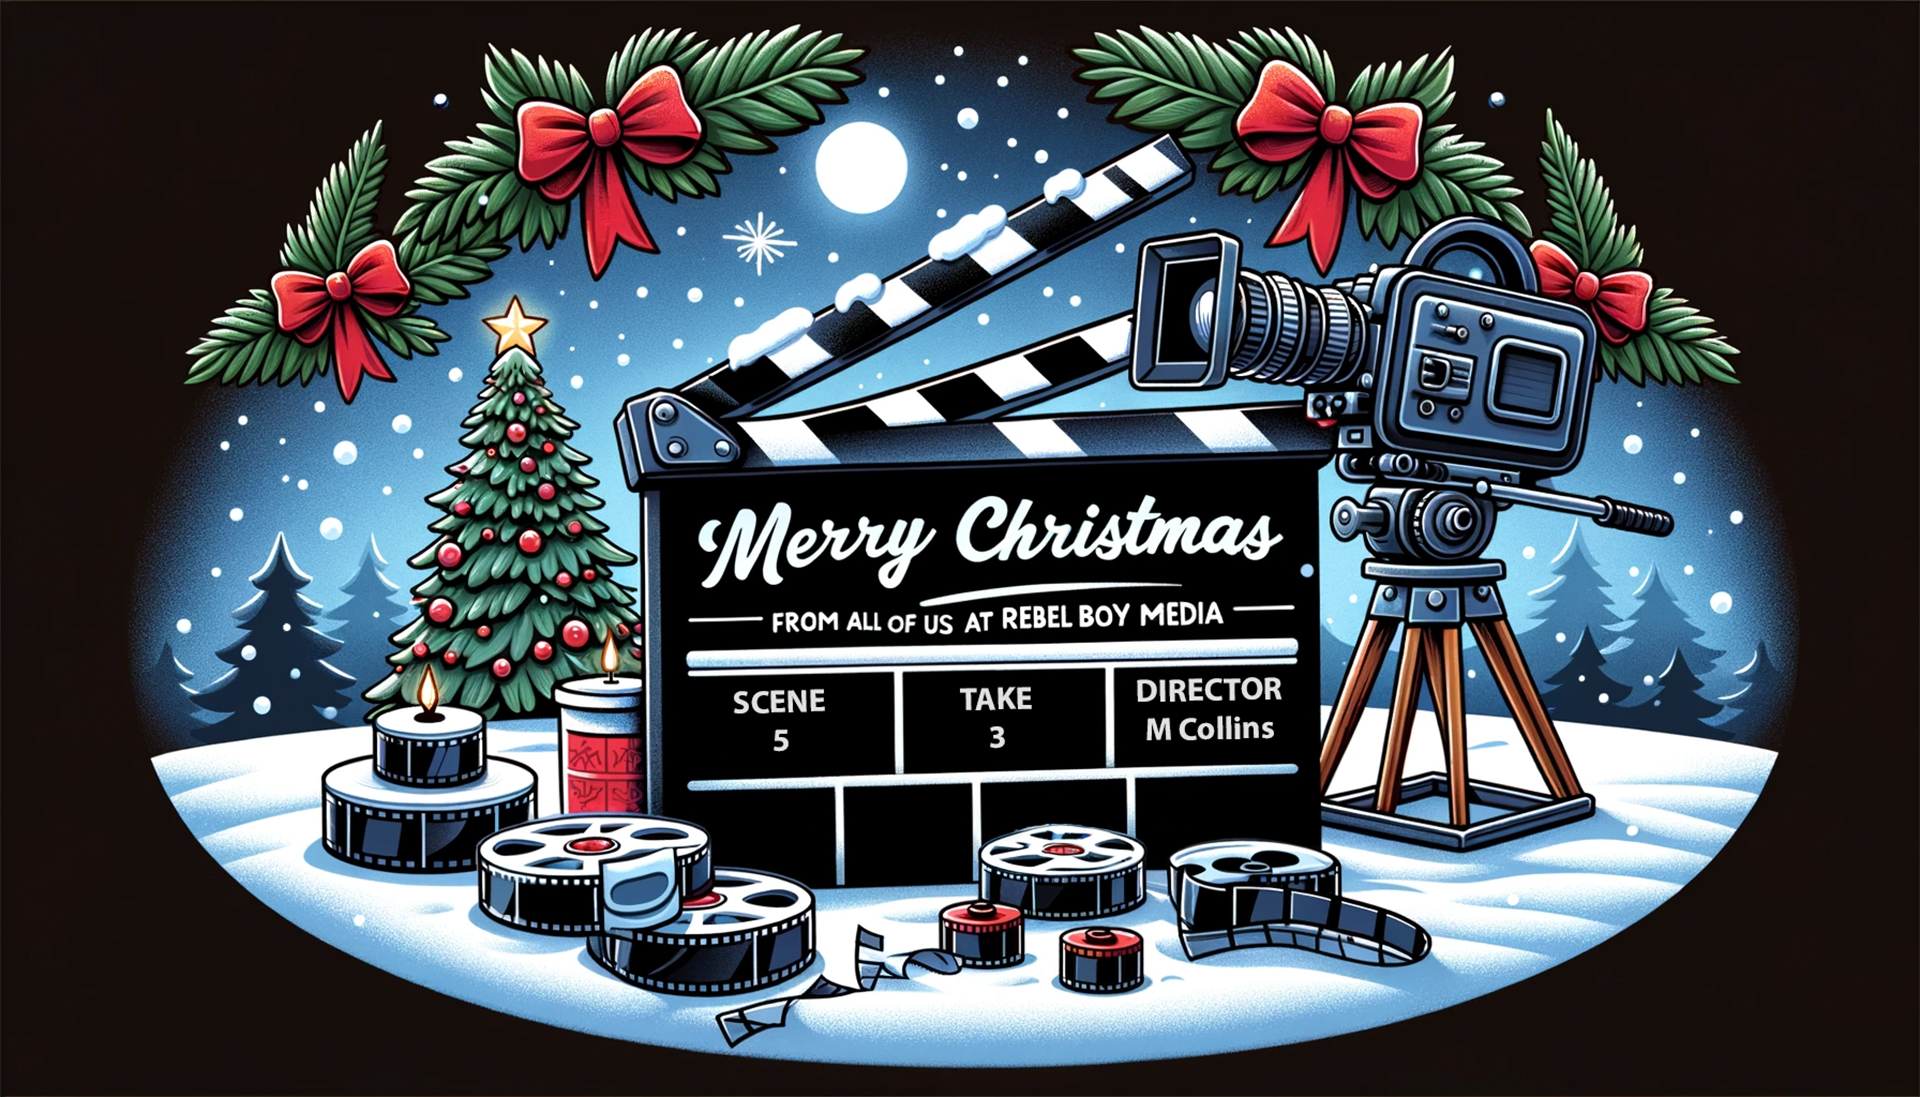 A Christmas Scene with a clapboard and filming equipment.